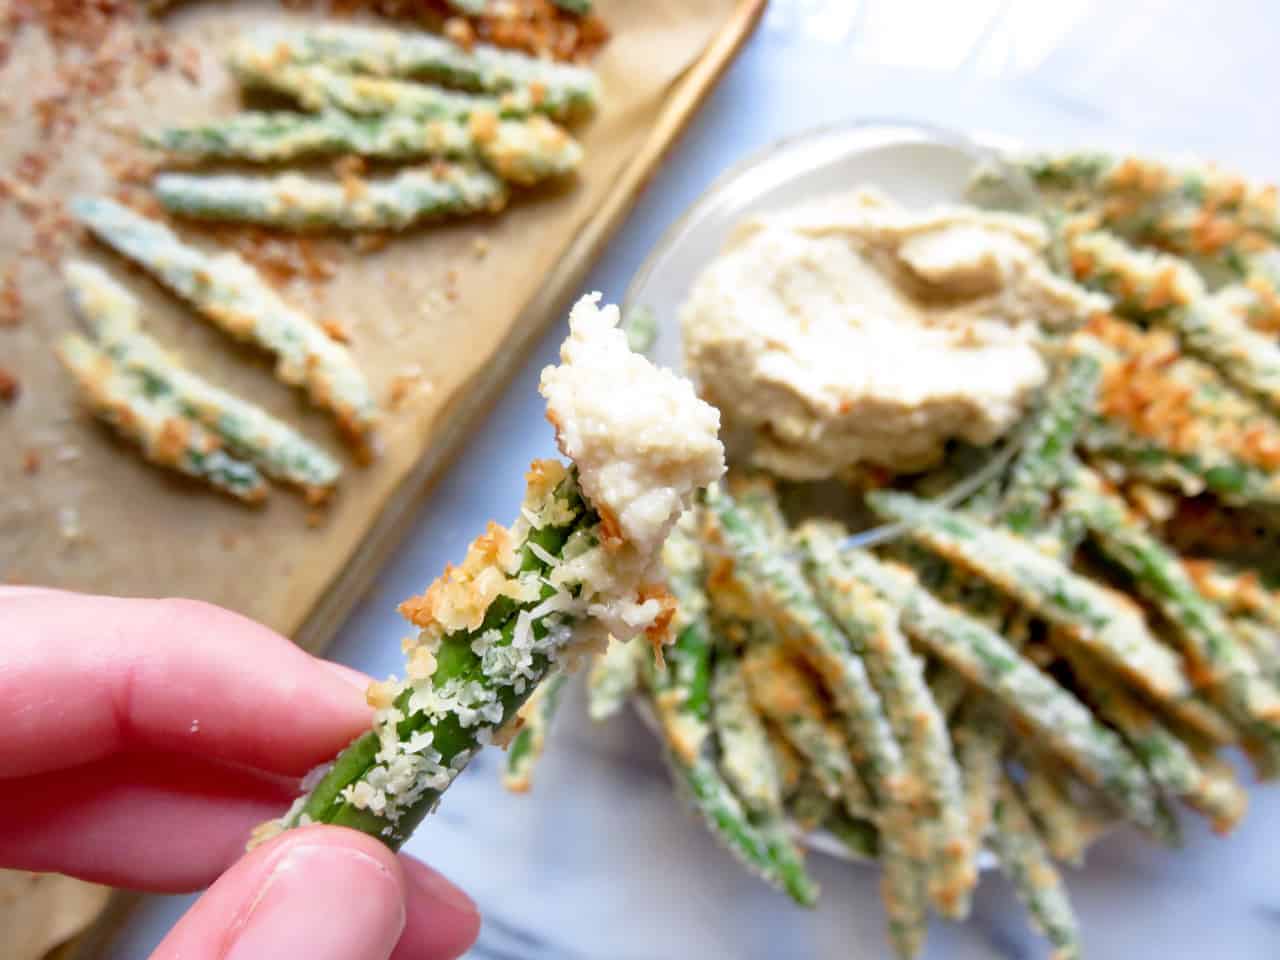 Coconut Crusted Green Beans + Cashew Dip